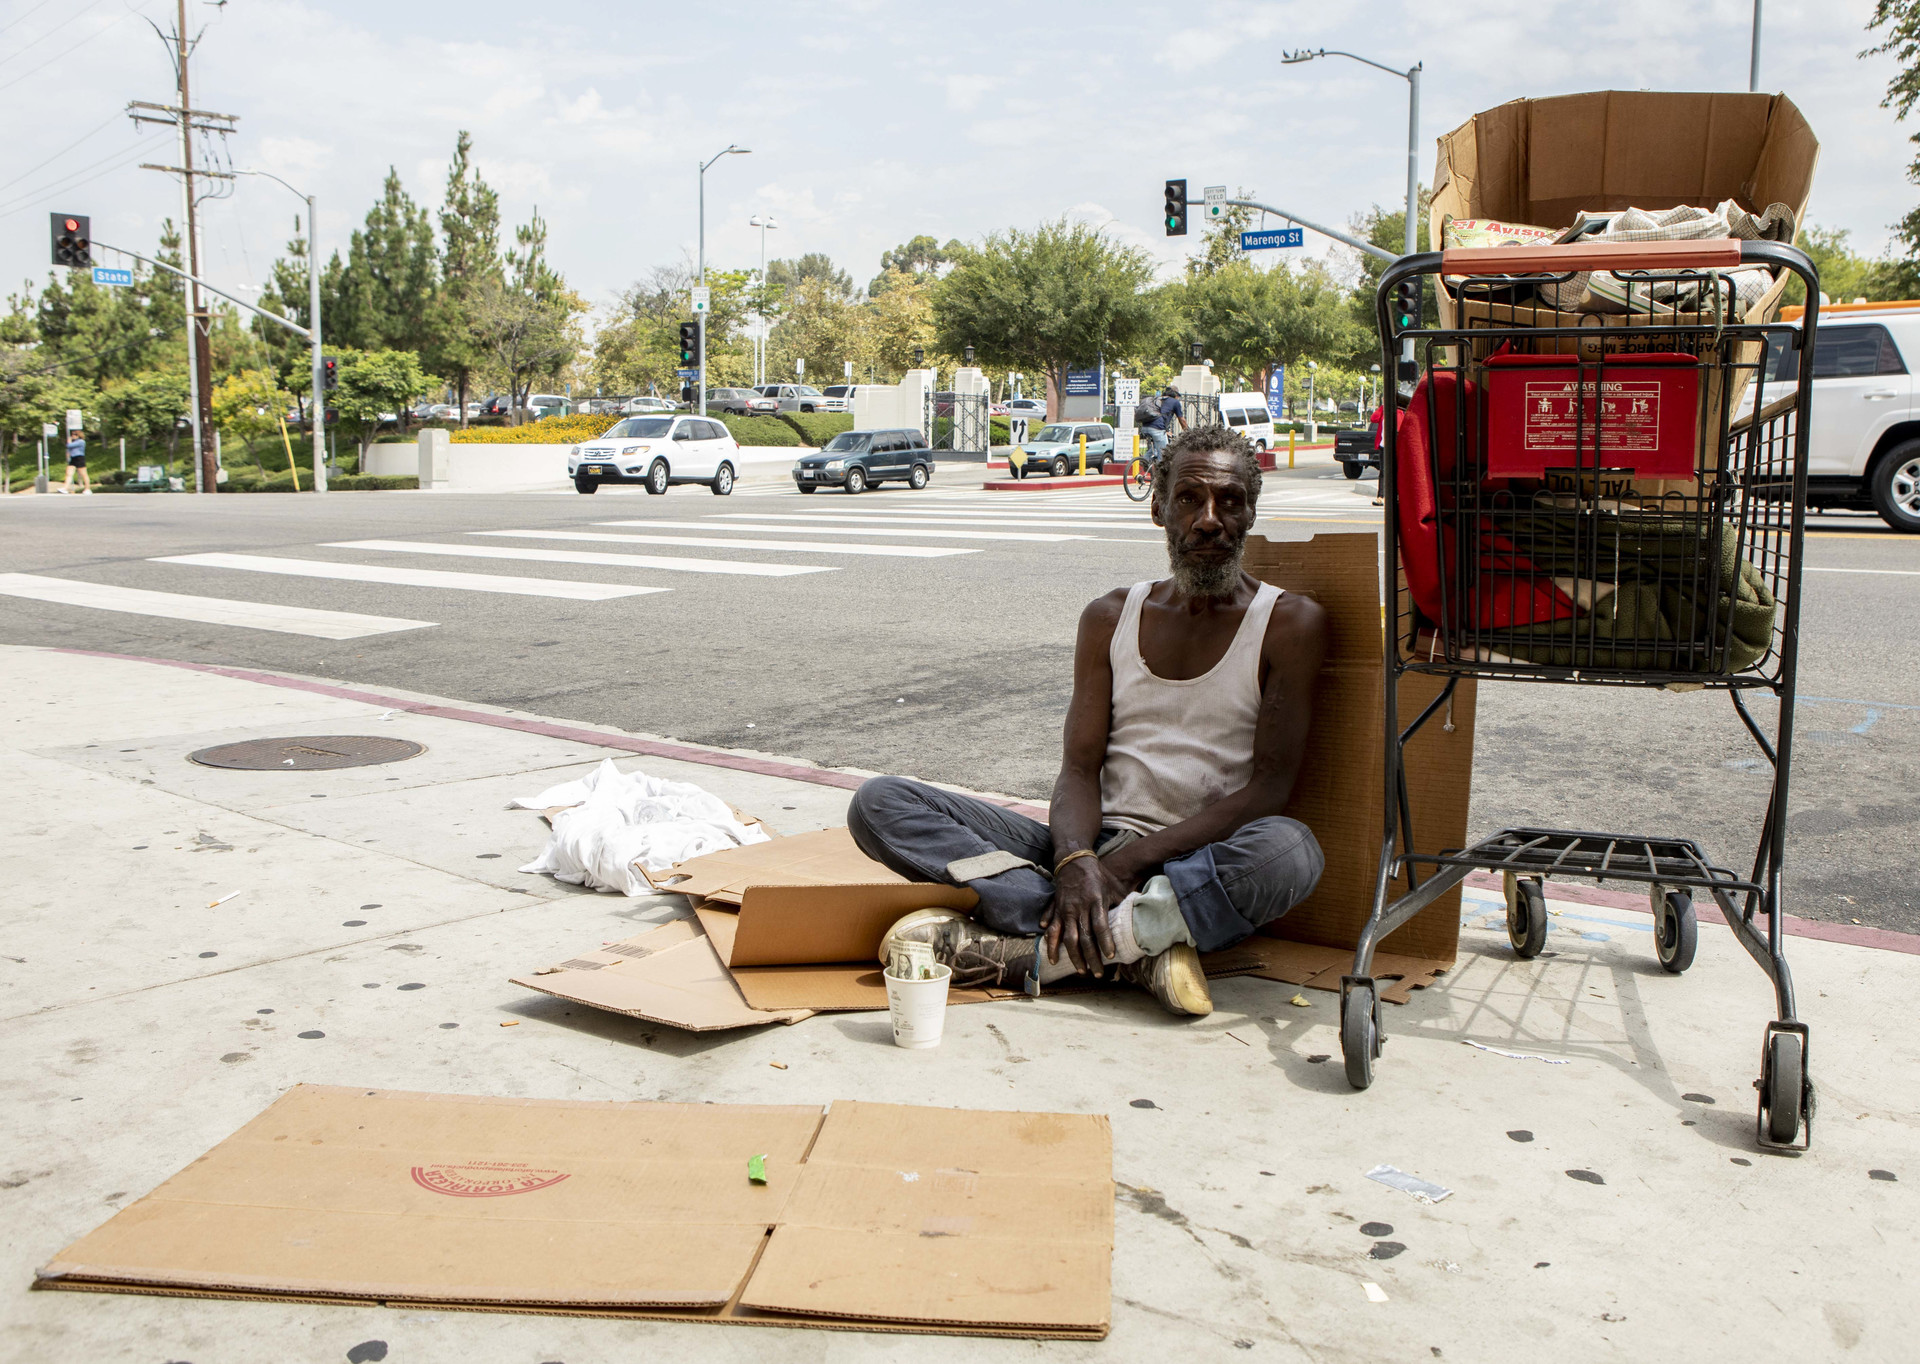 Will, who provided his first name only, sits on the sidewalk across the street from LAC+USC Medical Center to panhandle for money until he has enough to go to McDonalds down the block. Will has been homeless since he arrived in Los Angeles from Chicago in 1982. 